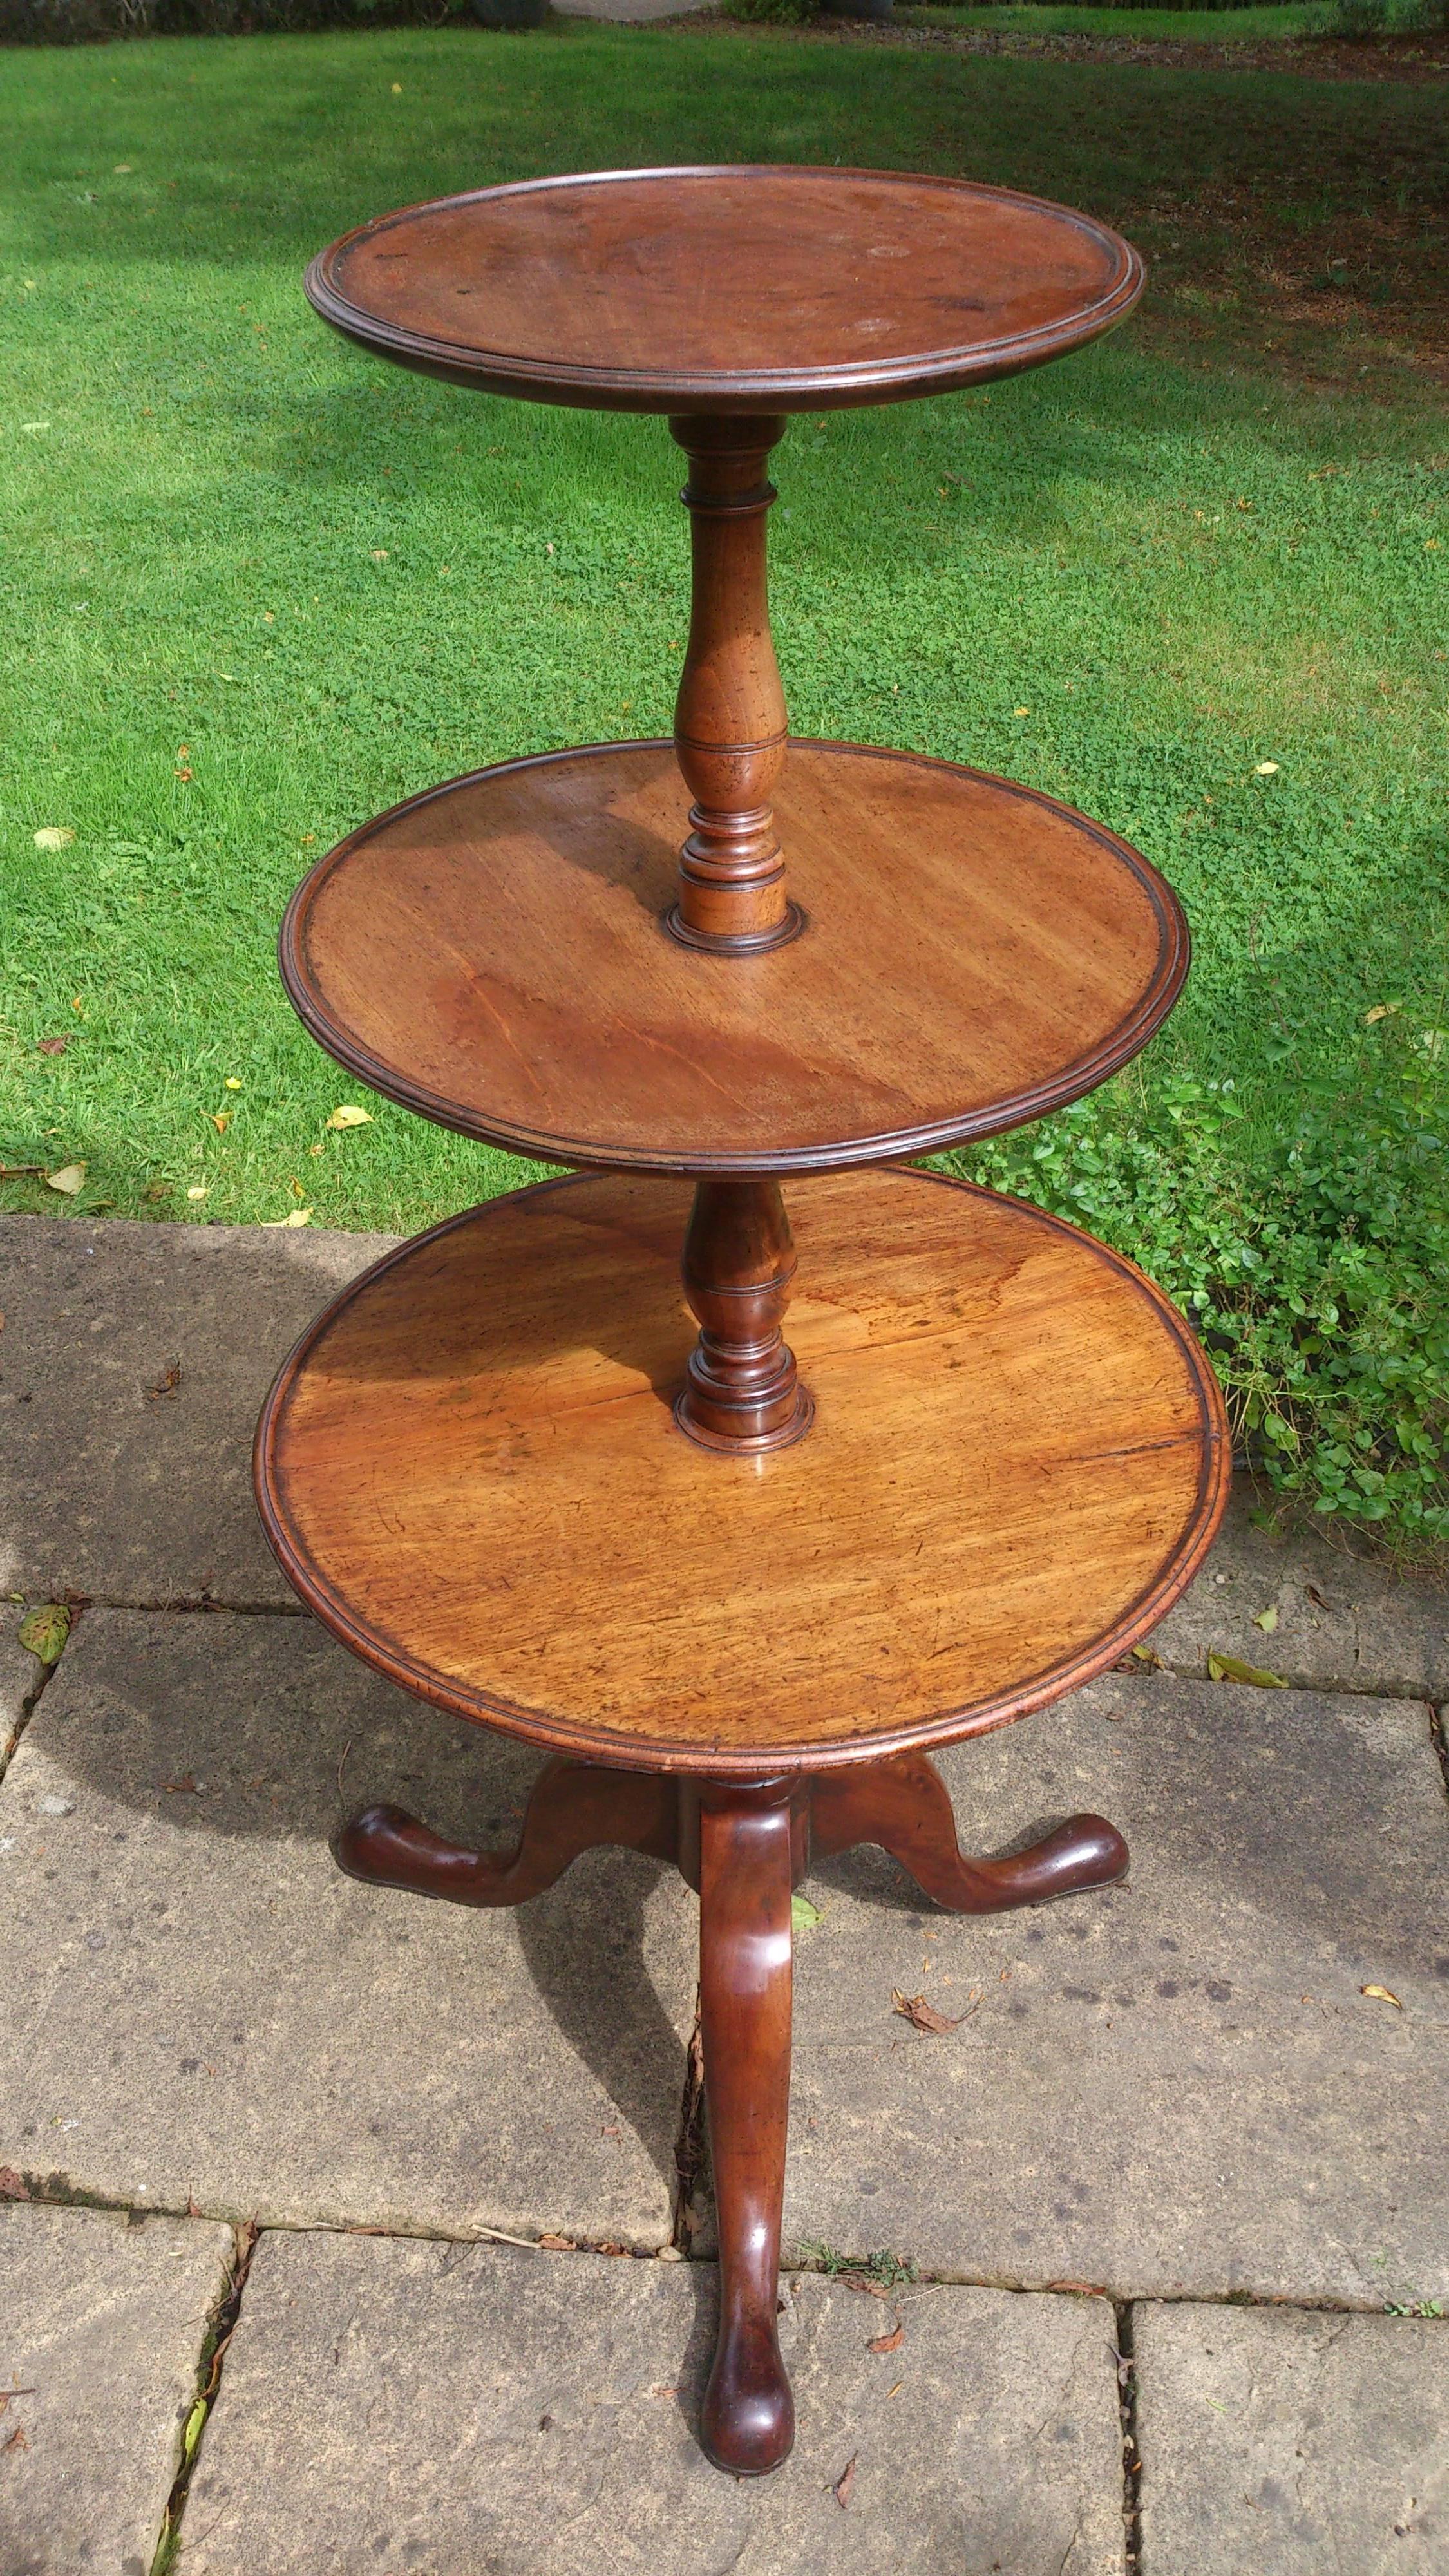 Charming George III mahogany three-tier antique dumb waiter or antique whatnot. Very useful at chair side for holding drinks, remote control, books or in the corner of a room to display plants or photograph frames. This is an elegant early version